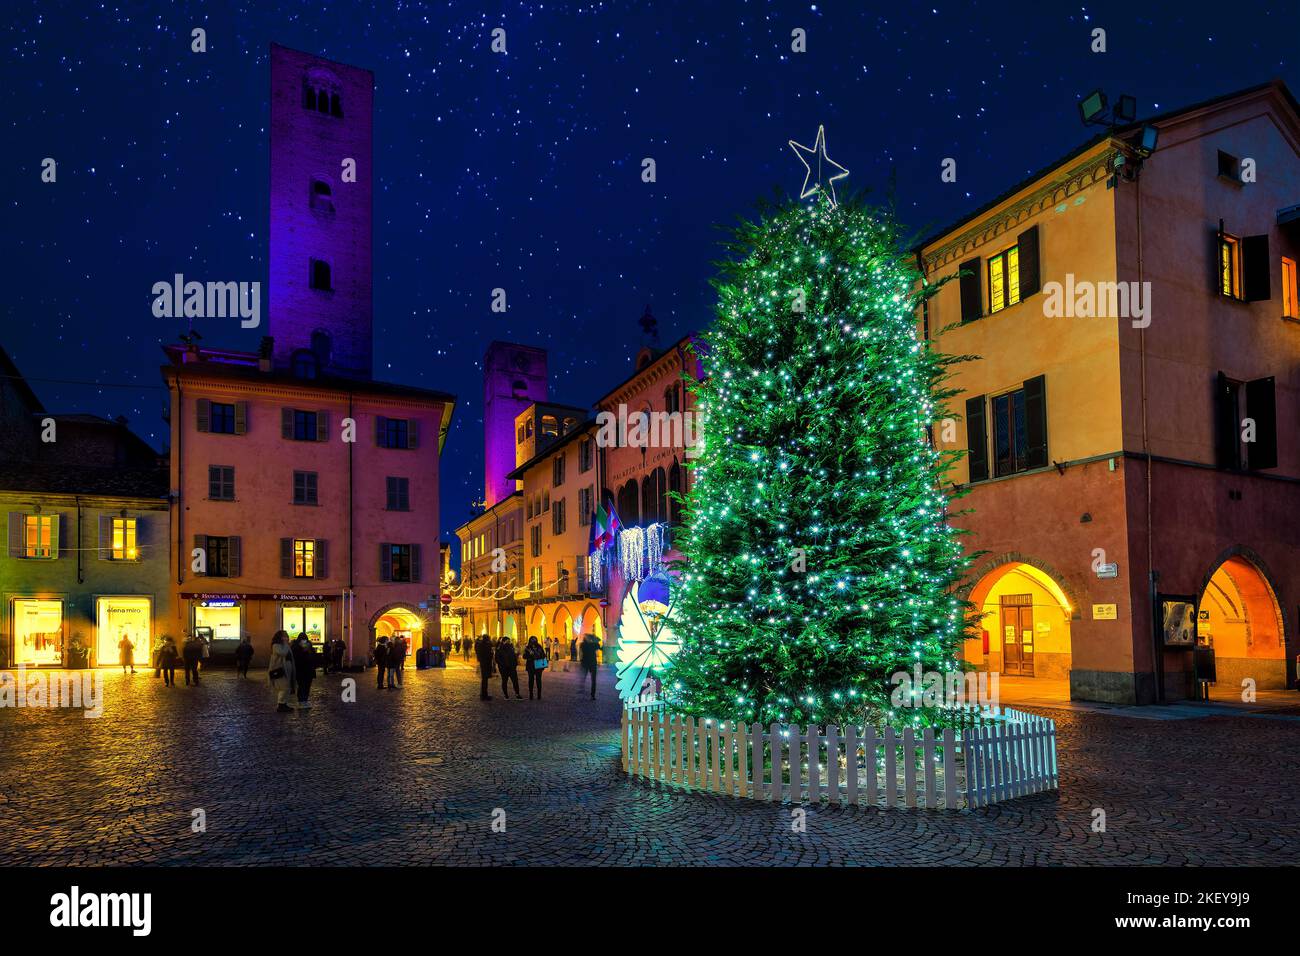 People looking at illuminated Christmas tree on town square among old historic building in Alba, Italy. Stock Photo